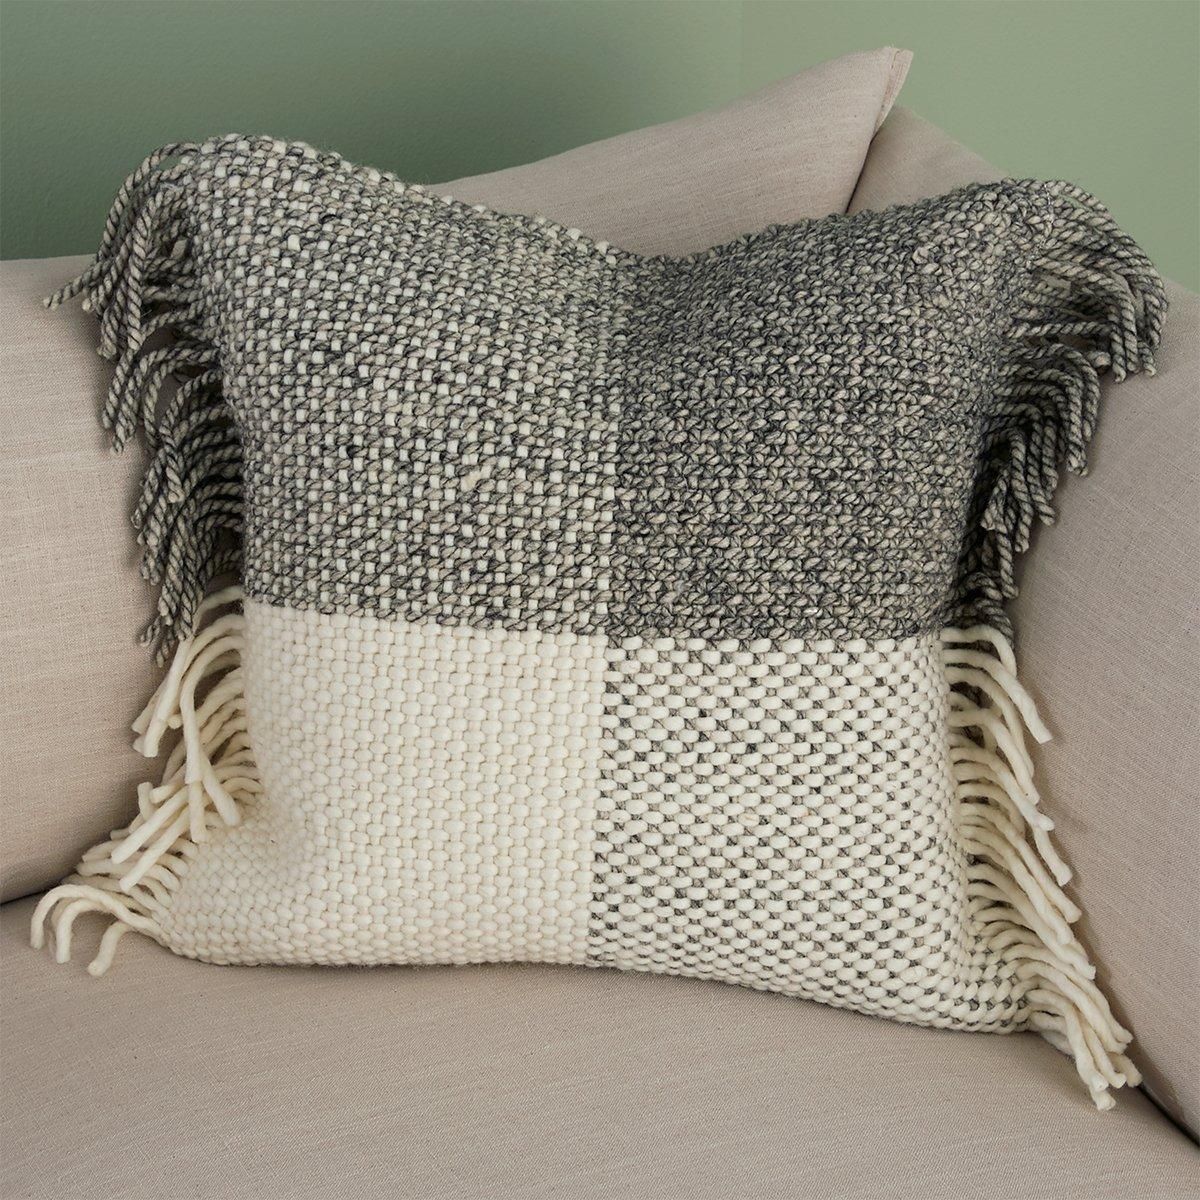 Whitaker Plaid Pillow | Shades of Light